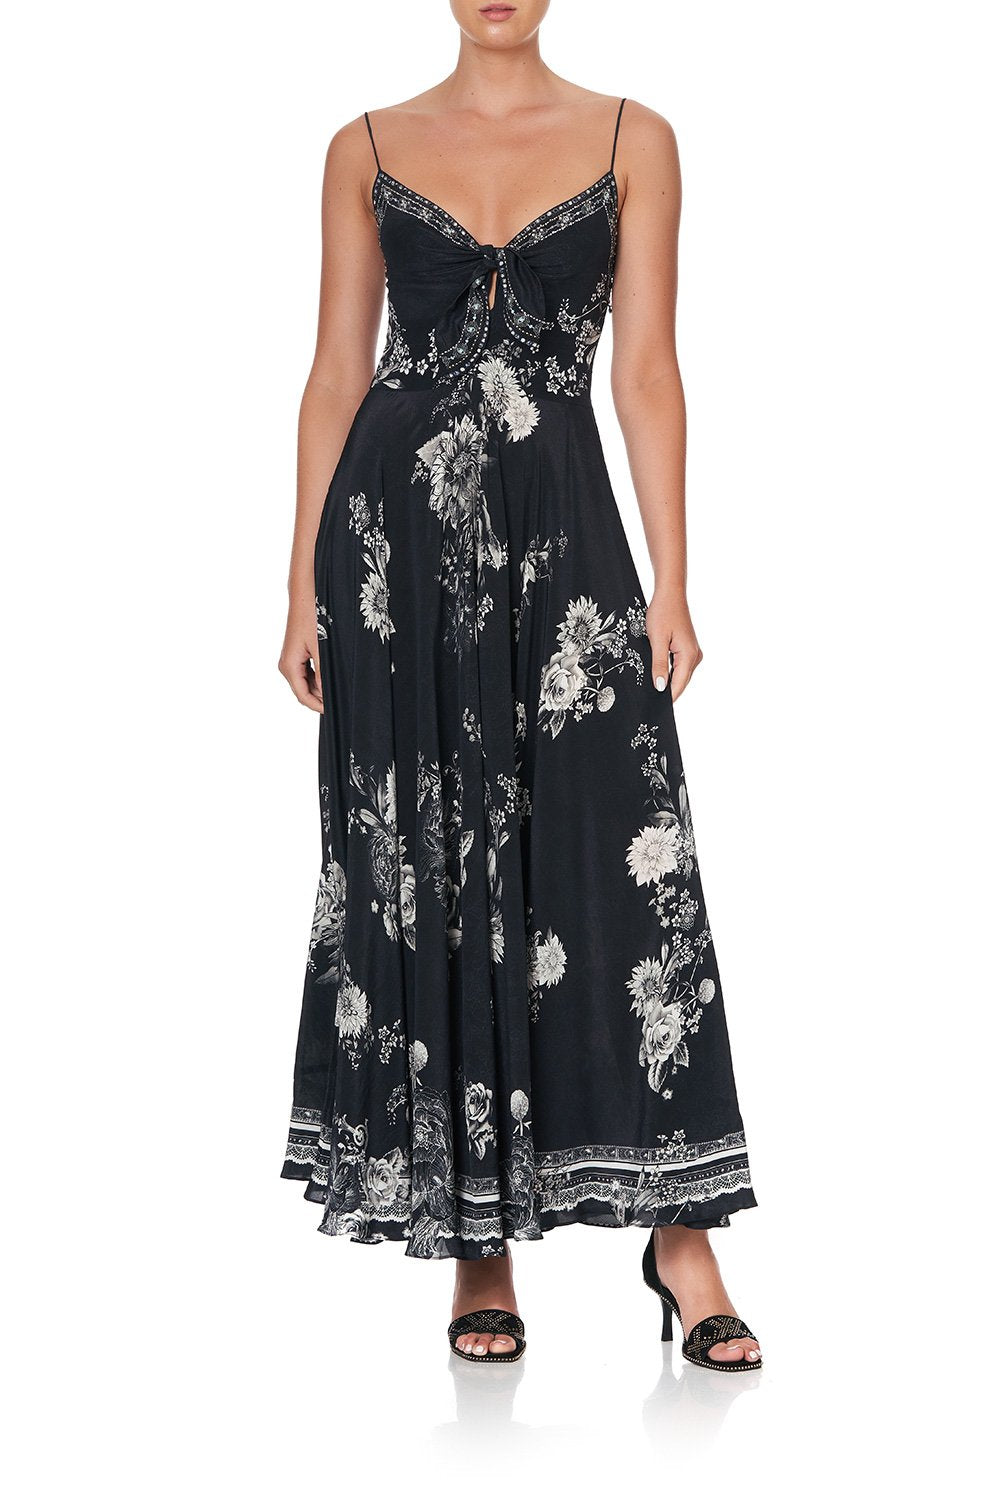 LONG DRESS WITH TIE FRONT MOONSHINE BLOOM